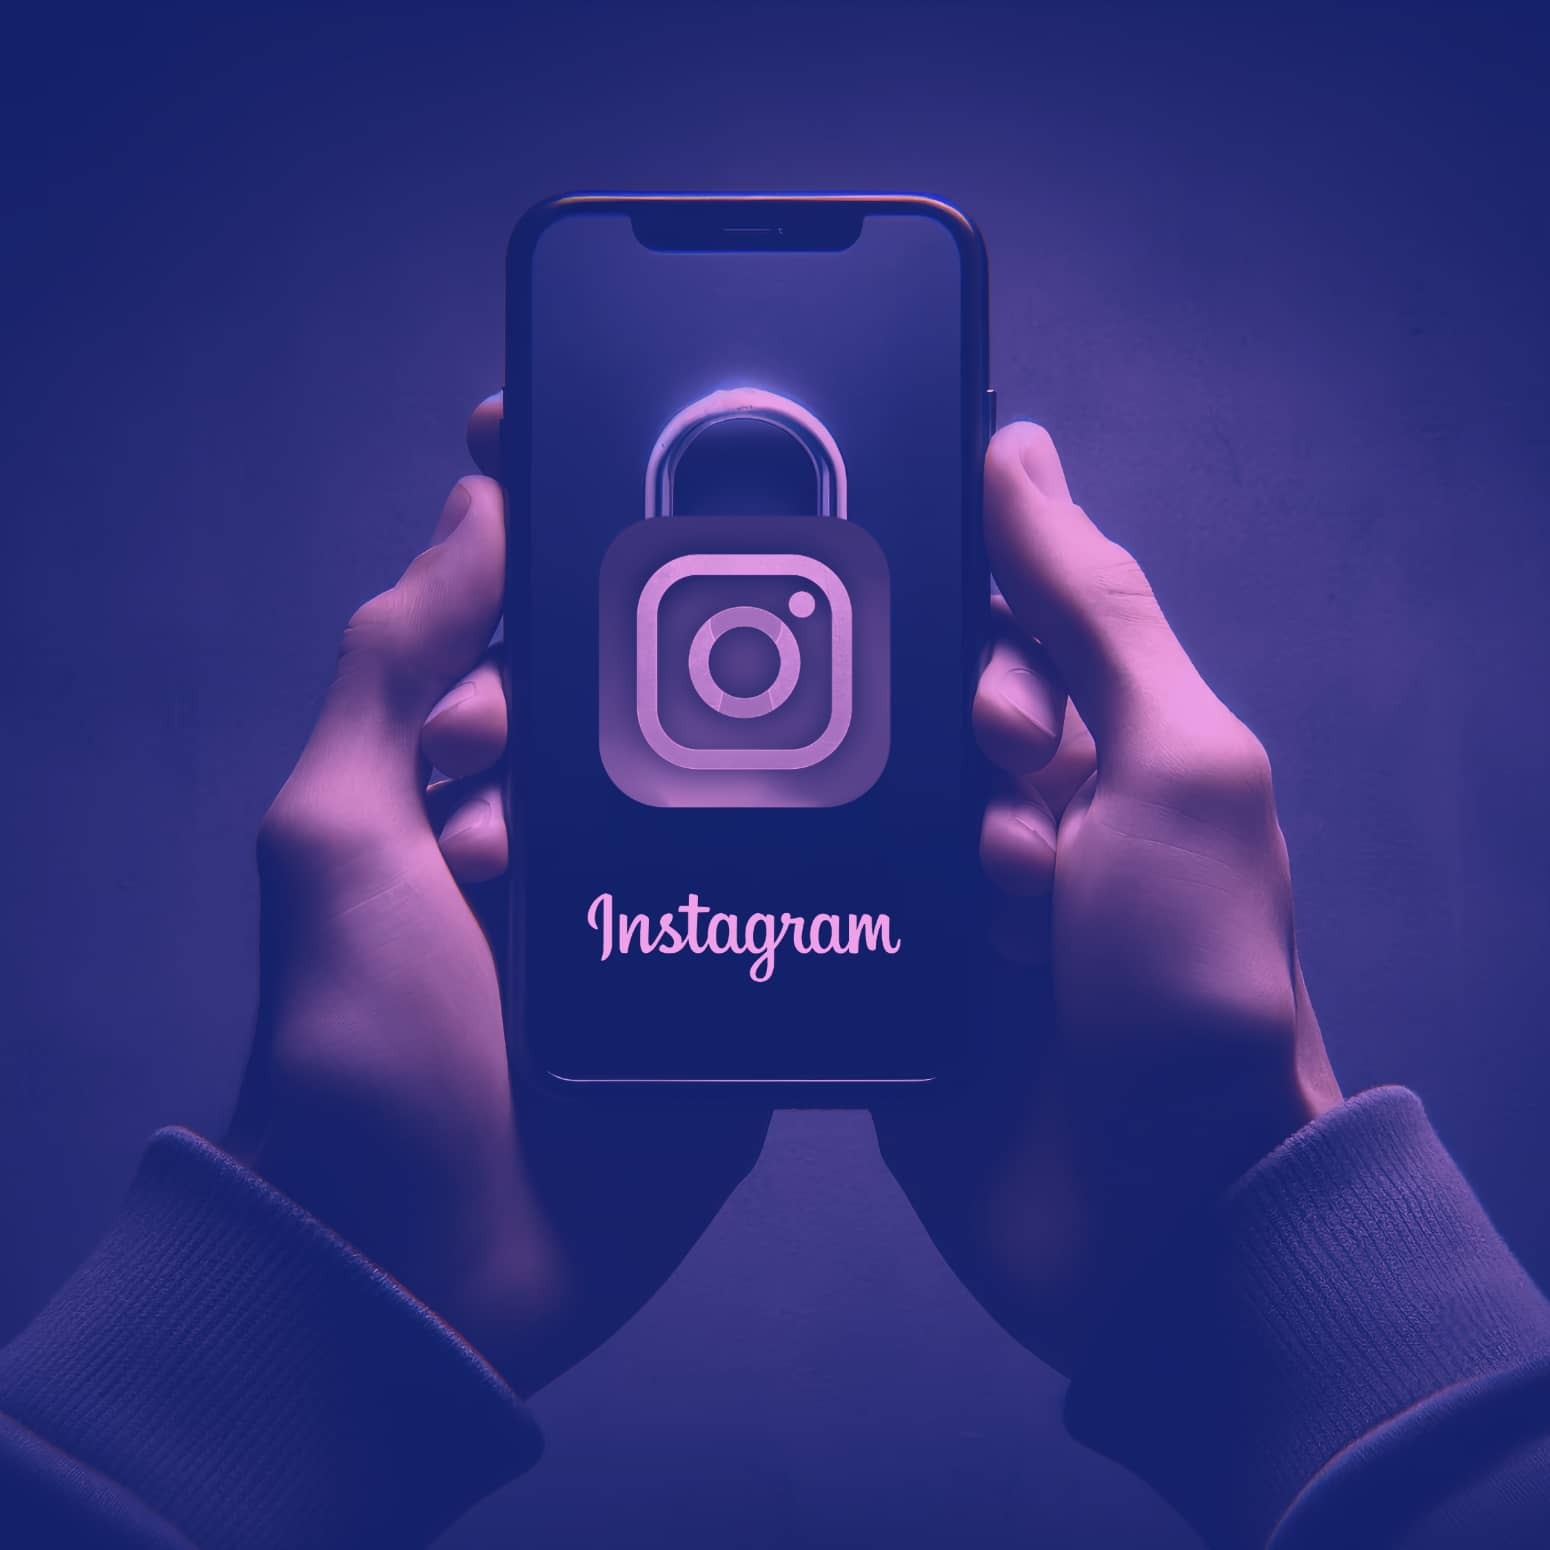 Meet the Instagram Ads Everyone Is Going to Hate